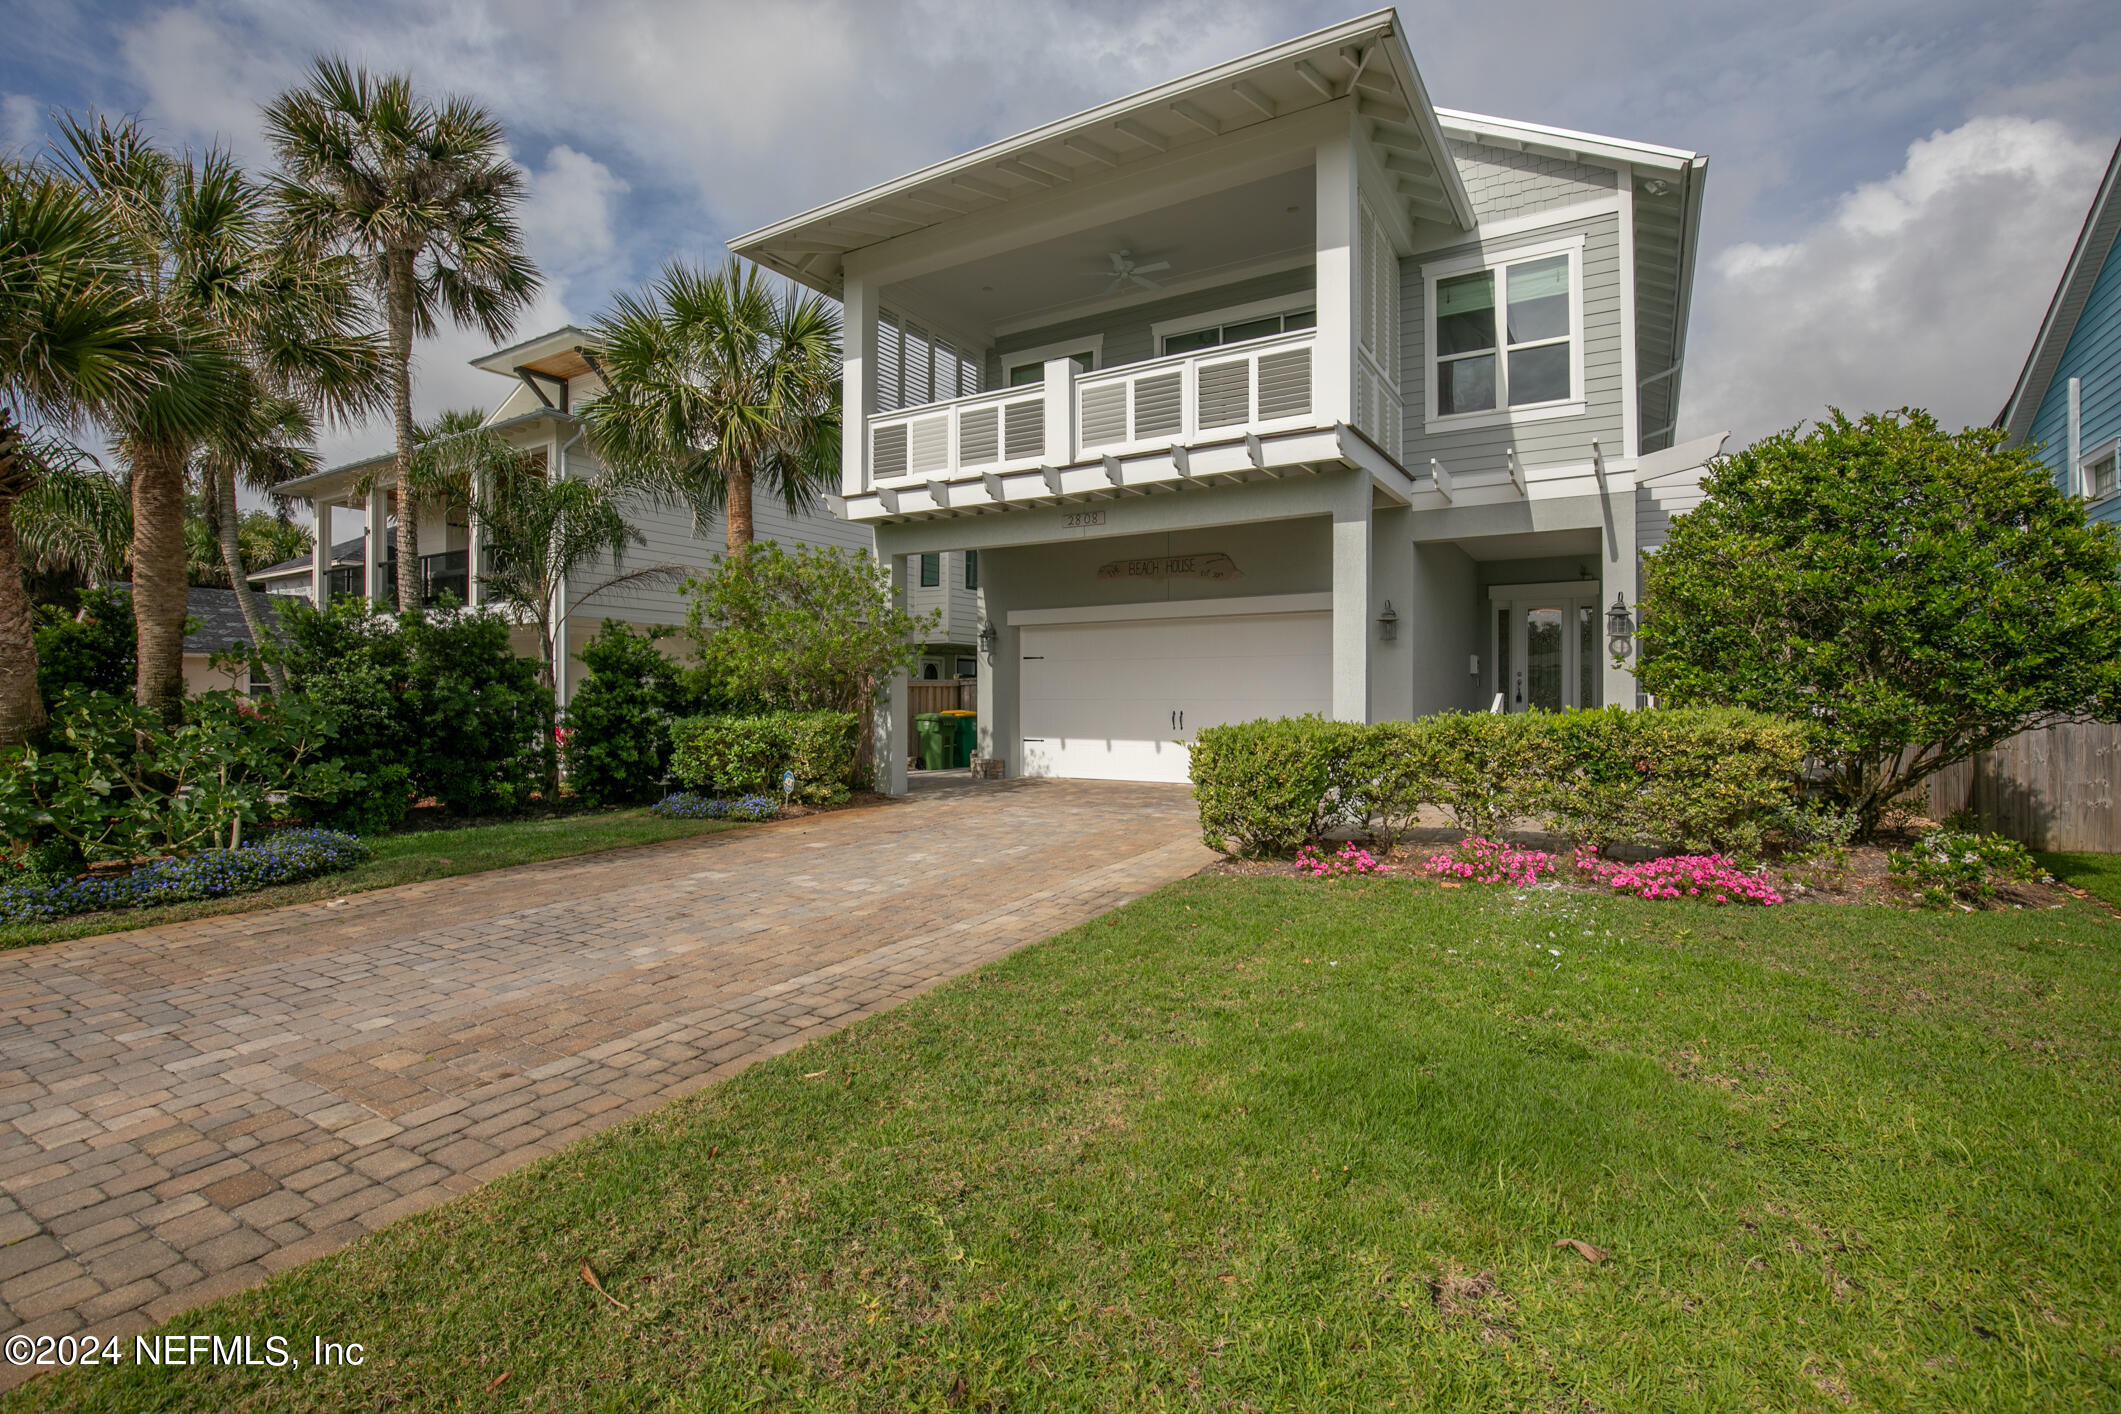 Jacksonville Beach, FL home for sale located at 2808 2nd Street S, Jacksonville Beach, FL 32250